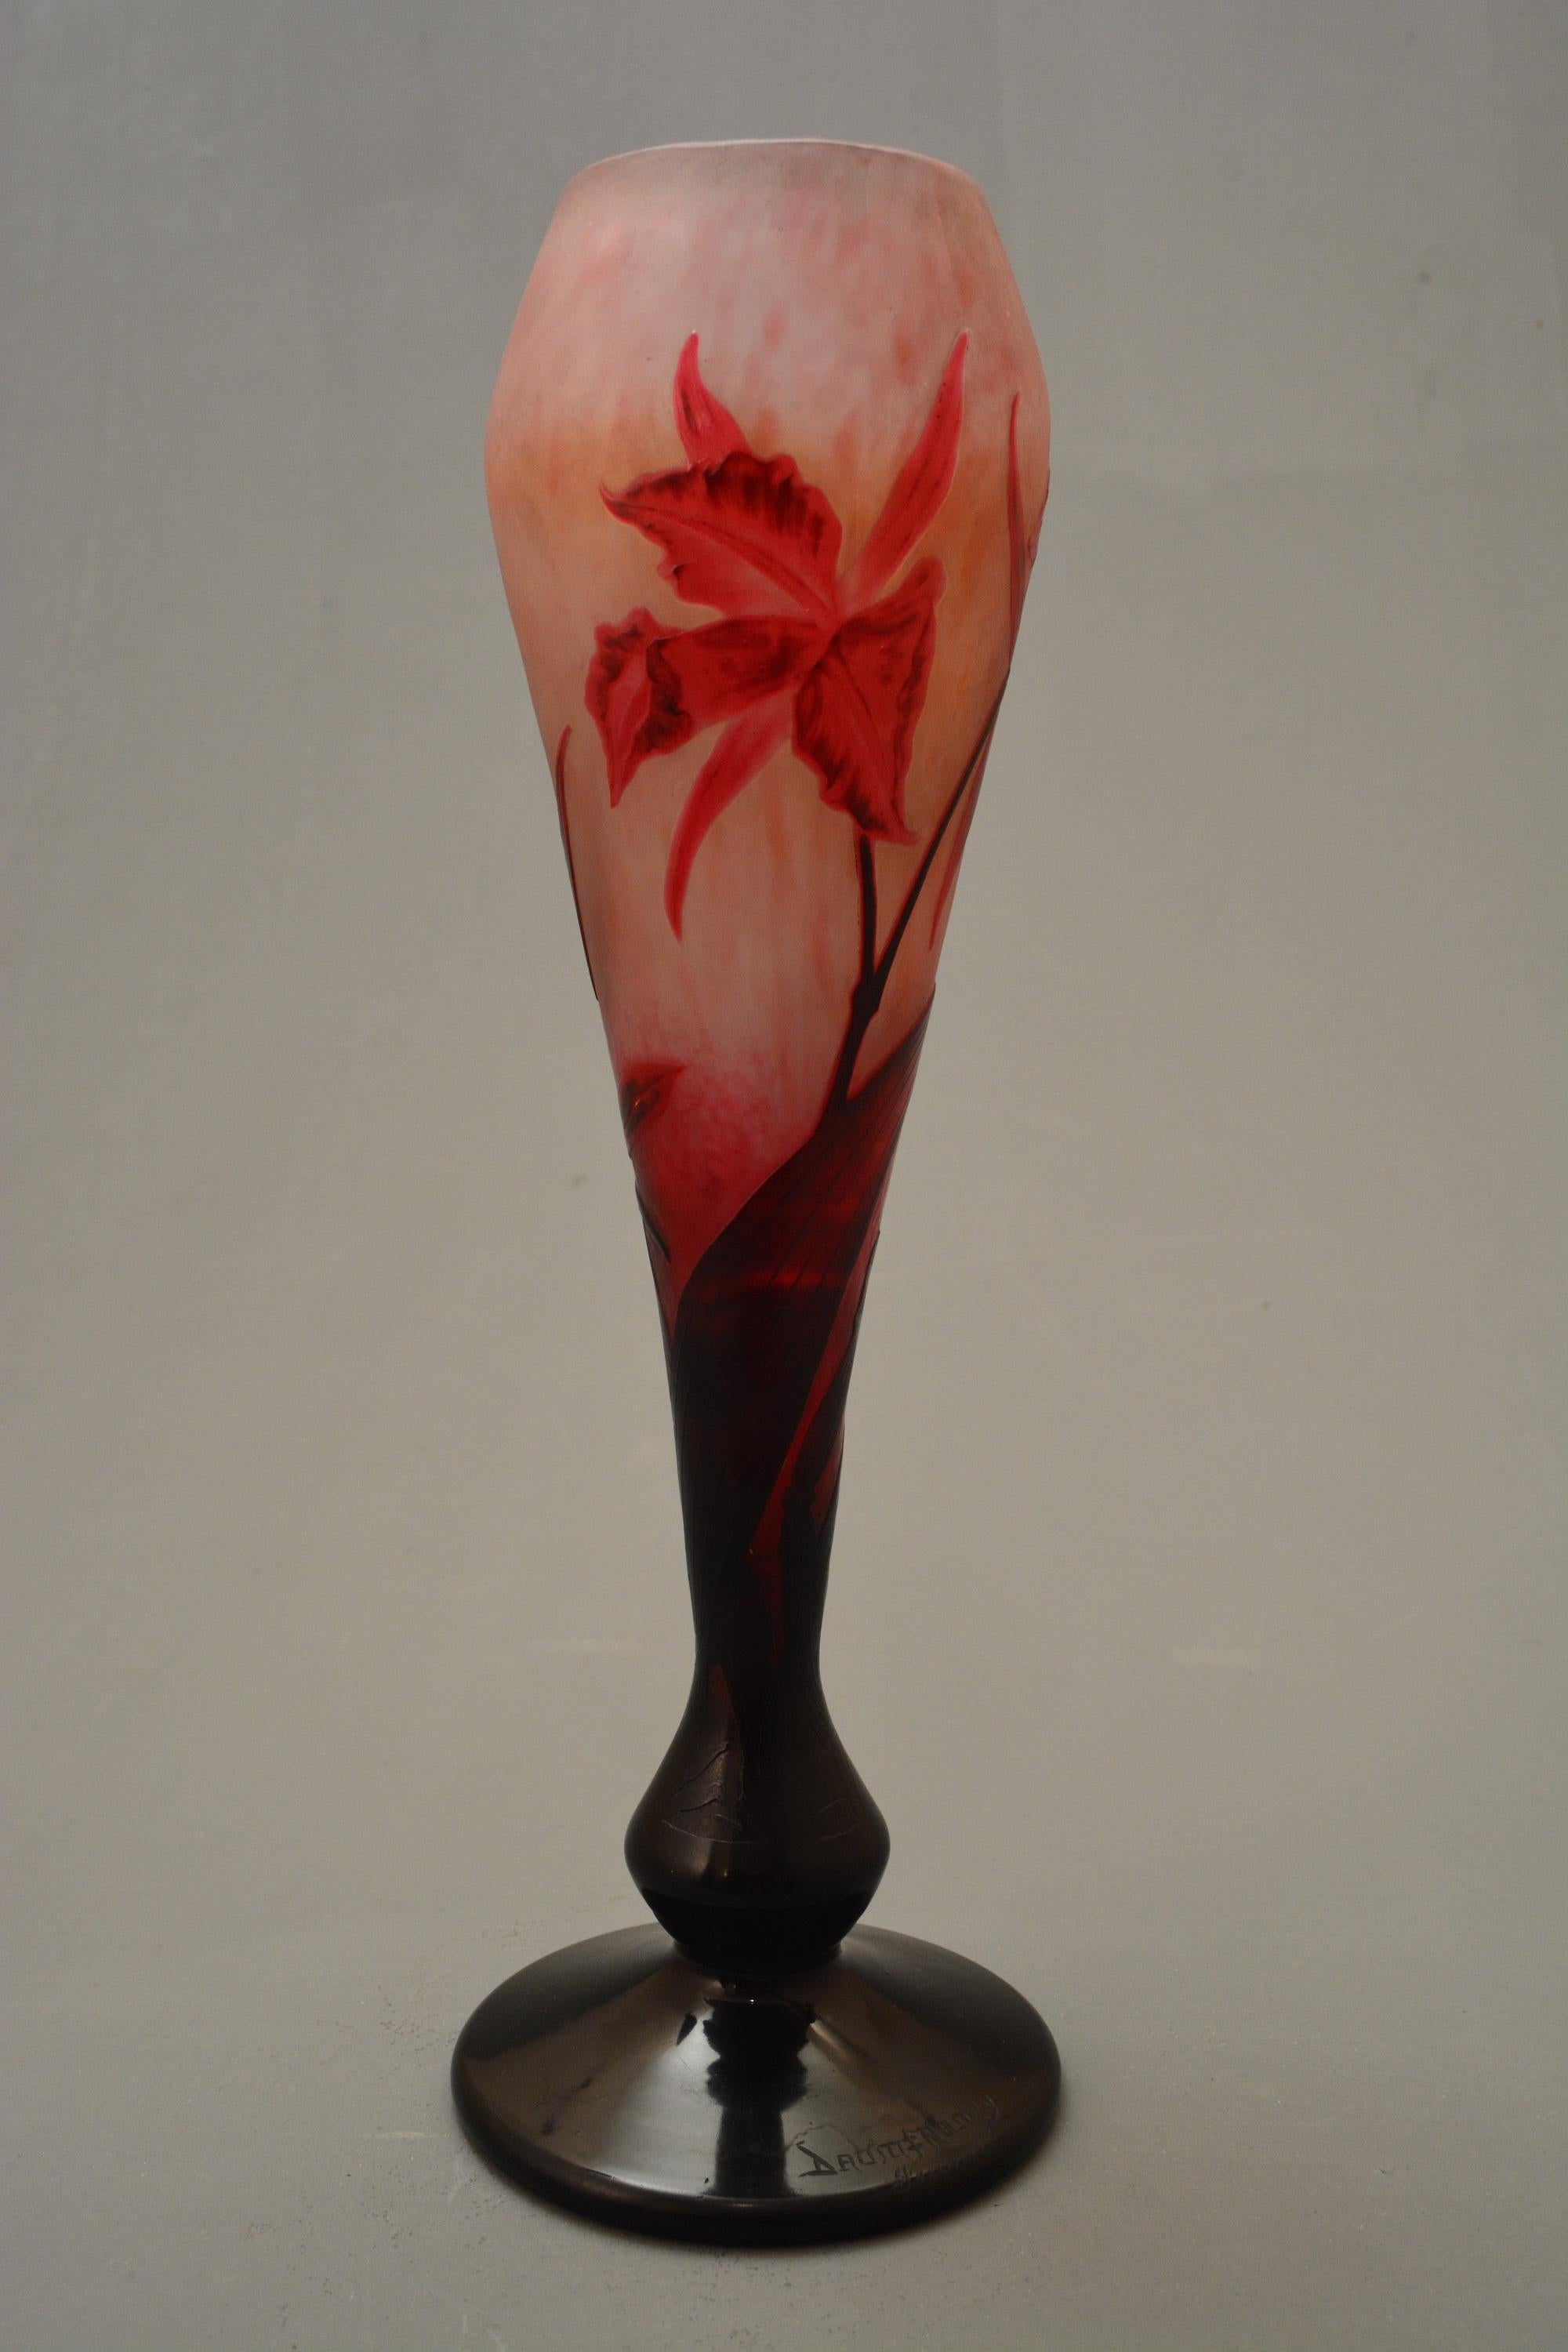 Double overlay, etched, wheel carved and partially martelè glass vase of spreading footed form, the pink marbled martelè ground overlaid in reddish purple with a cattleya labiata decoration.
Daum production.
Signed Daum-cross of